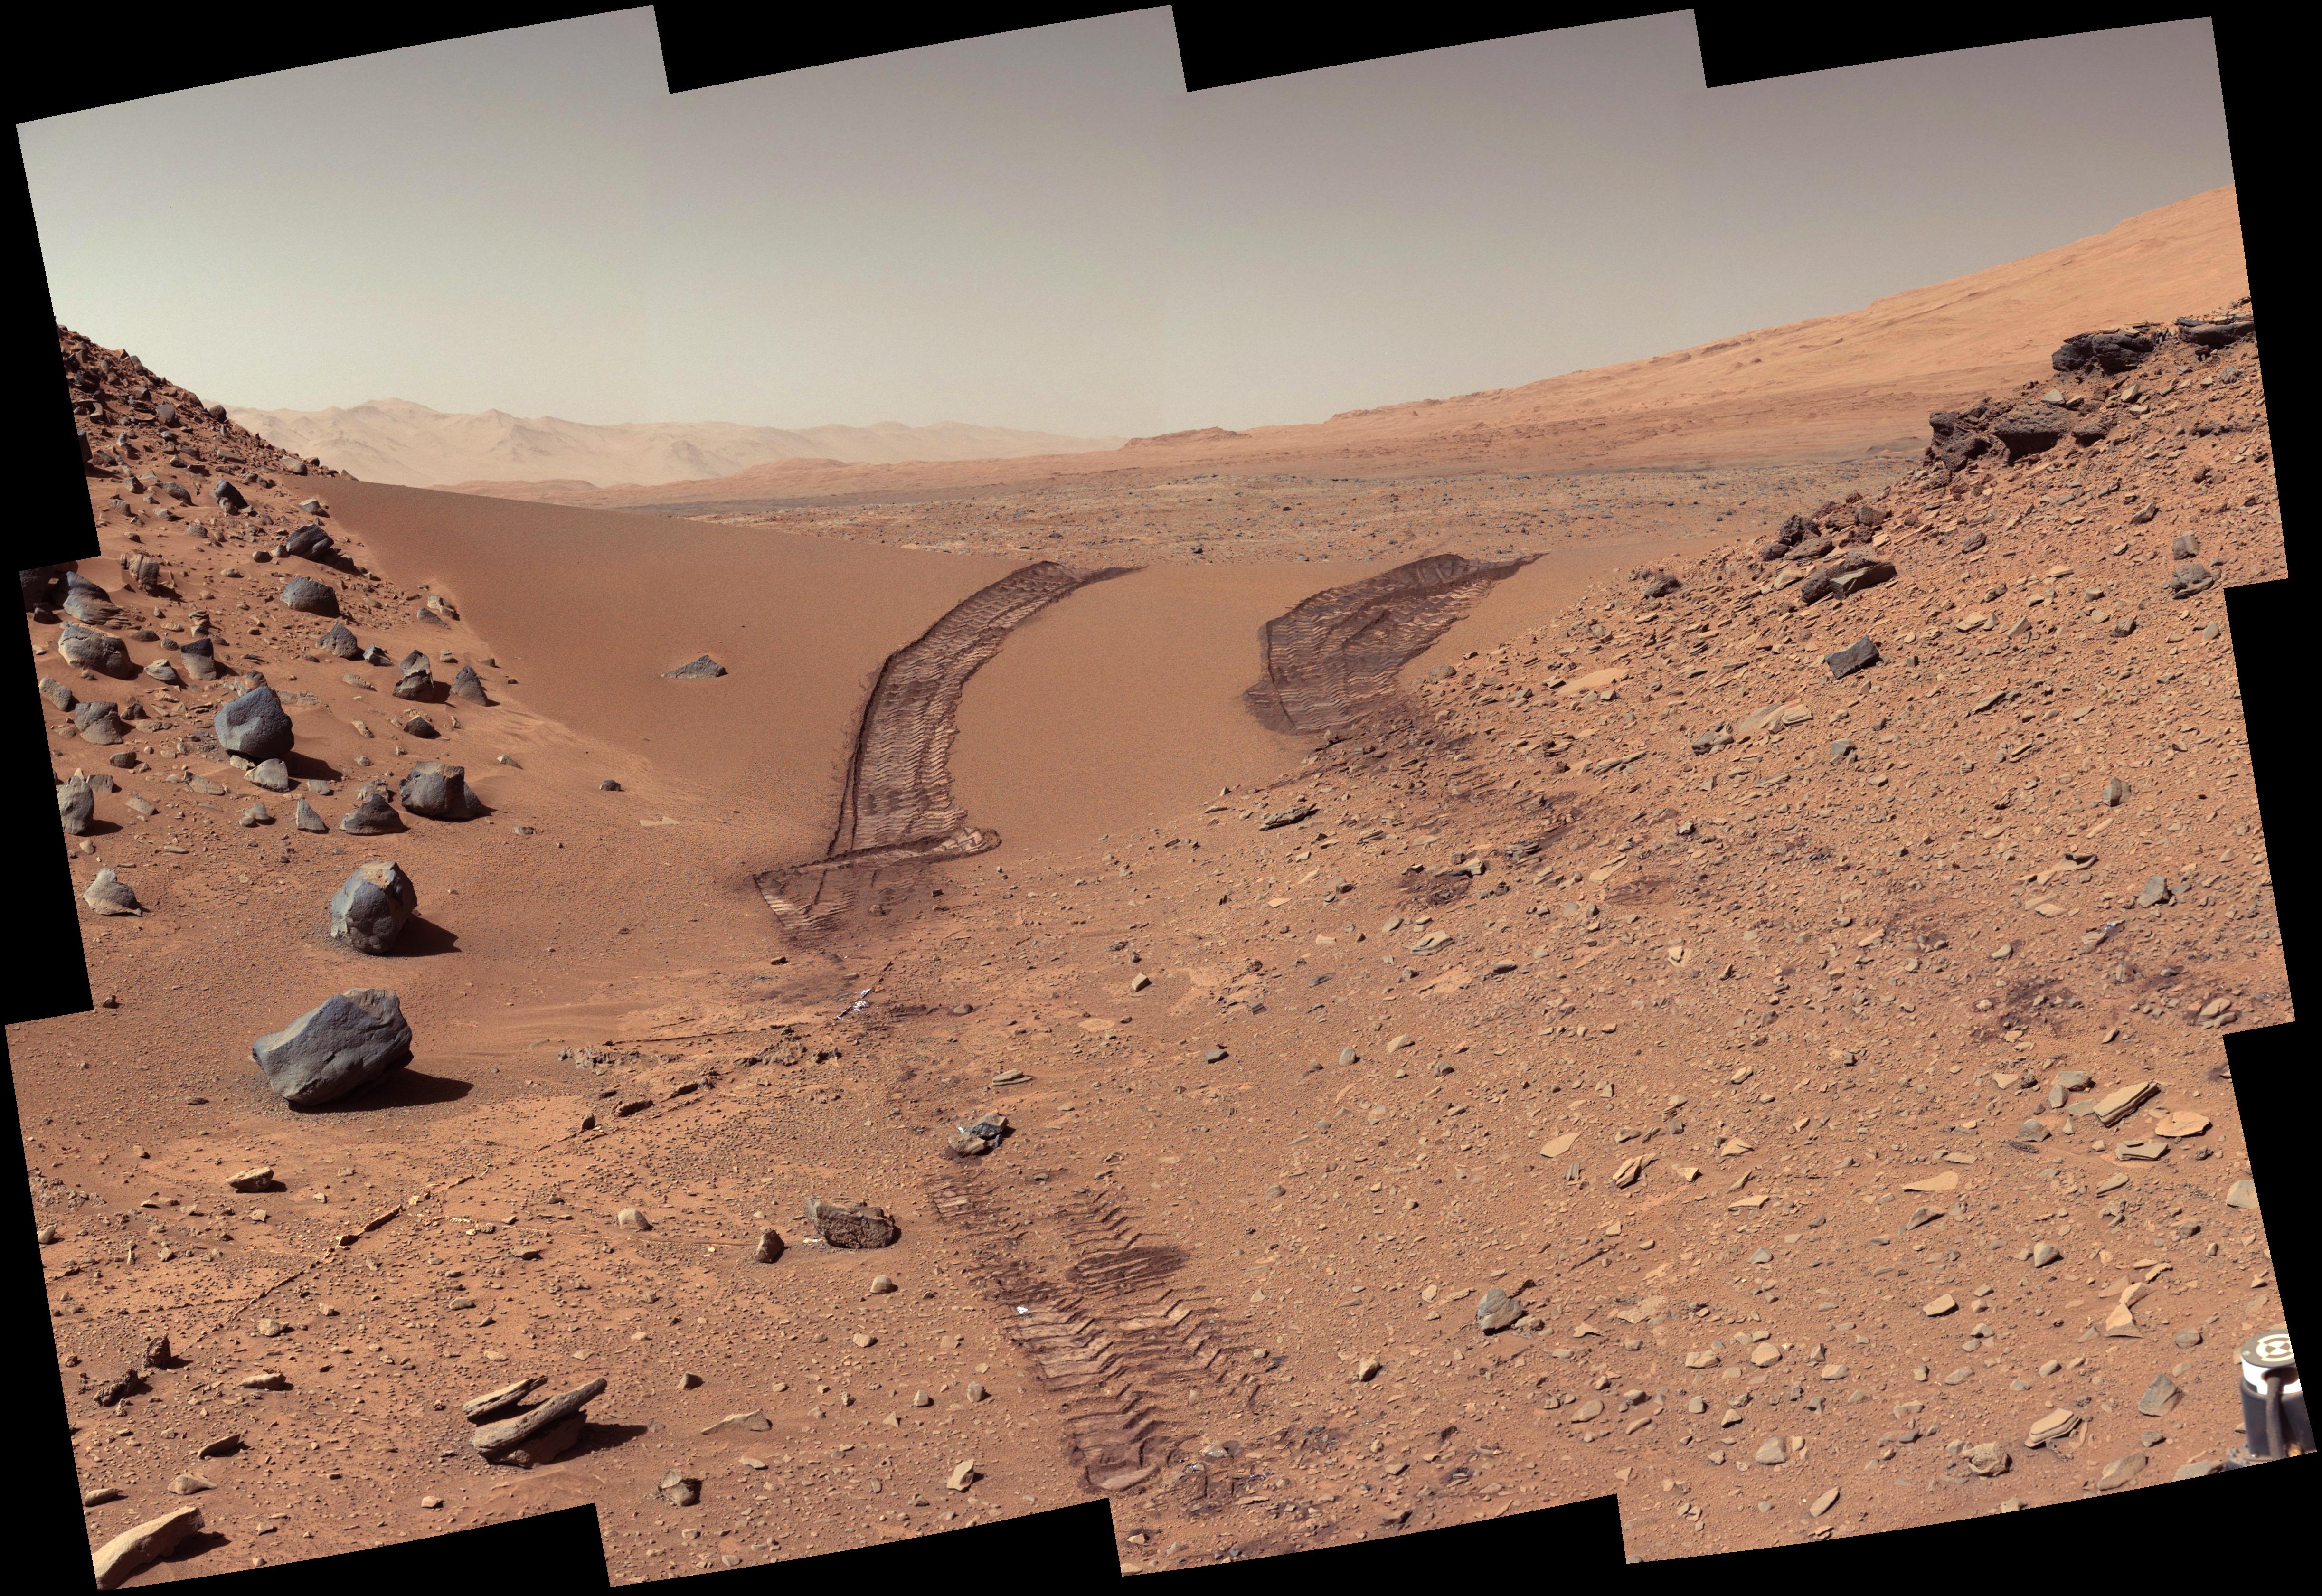 Tracks in the Martian soil left by the Curiosity rover. Credit: NASA/JPL-Caltech/MSSS